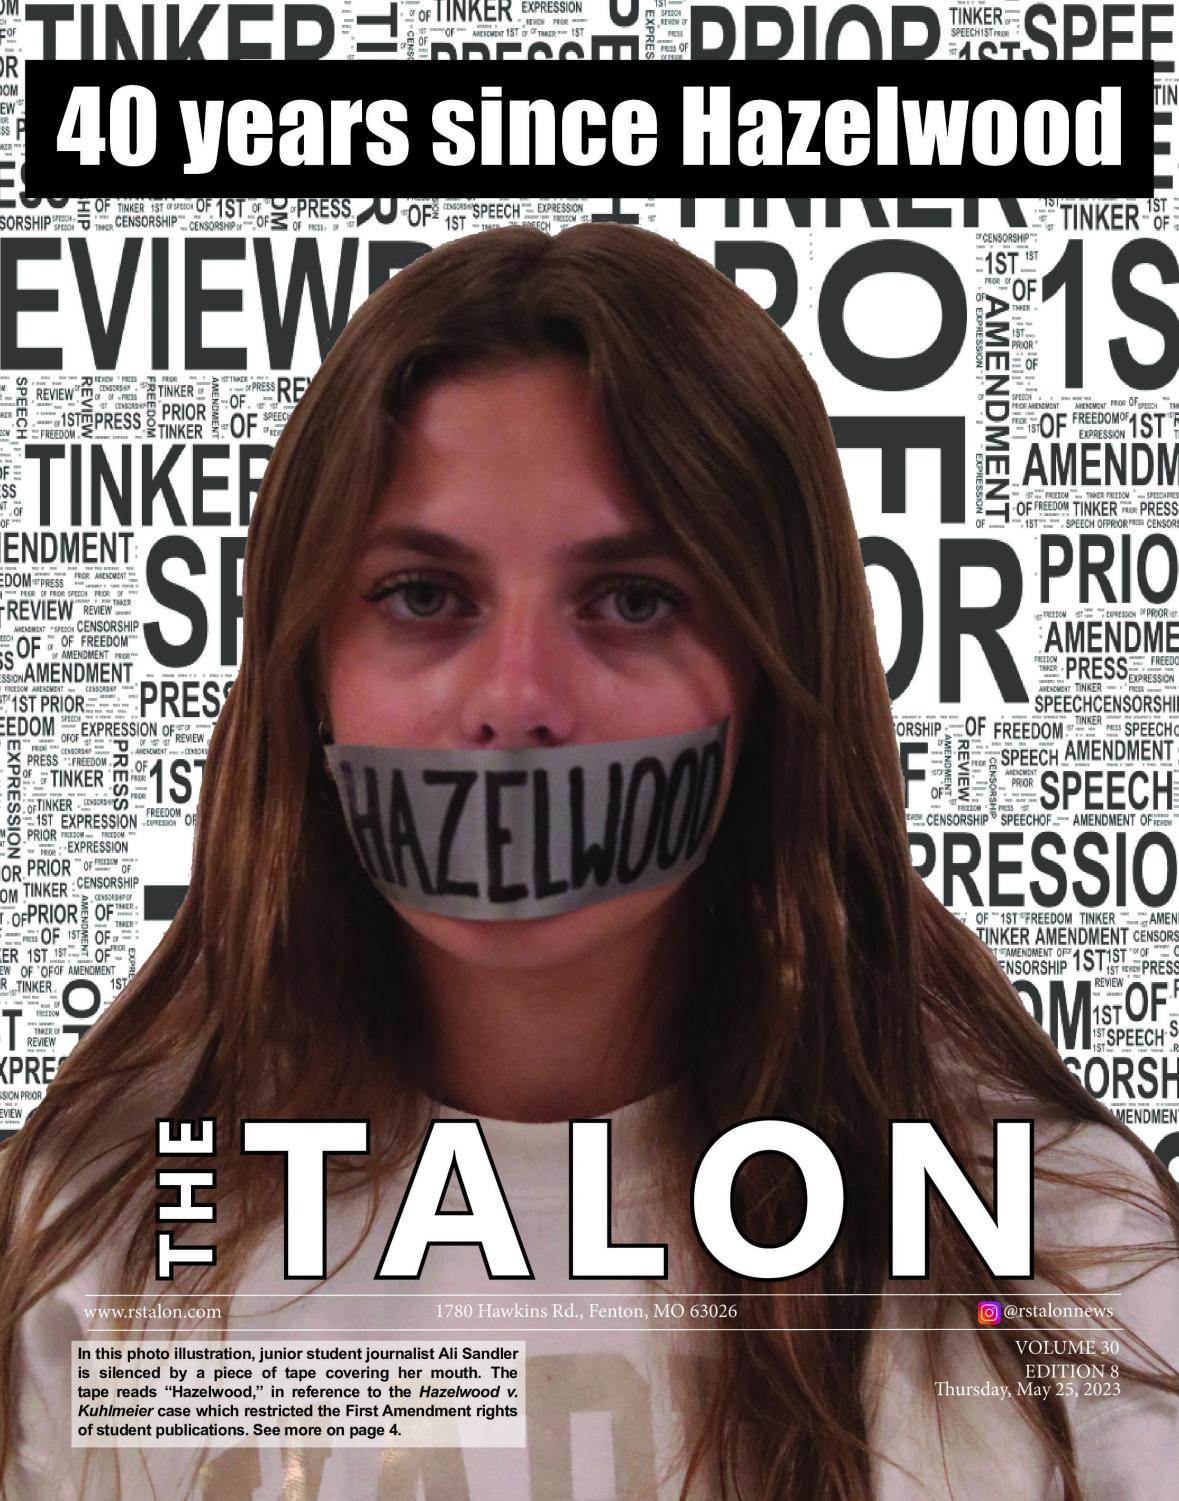 In this photo illustration, junior student journalist Ali Sandler is silenced by a piece of tape covering her mouth. The tape reads “Hazelwood,” in reference to the Hazelwood v. Kuhlmeier case which restricted the First Amendment rights
of student publications.